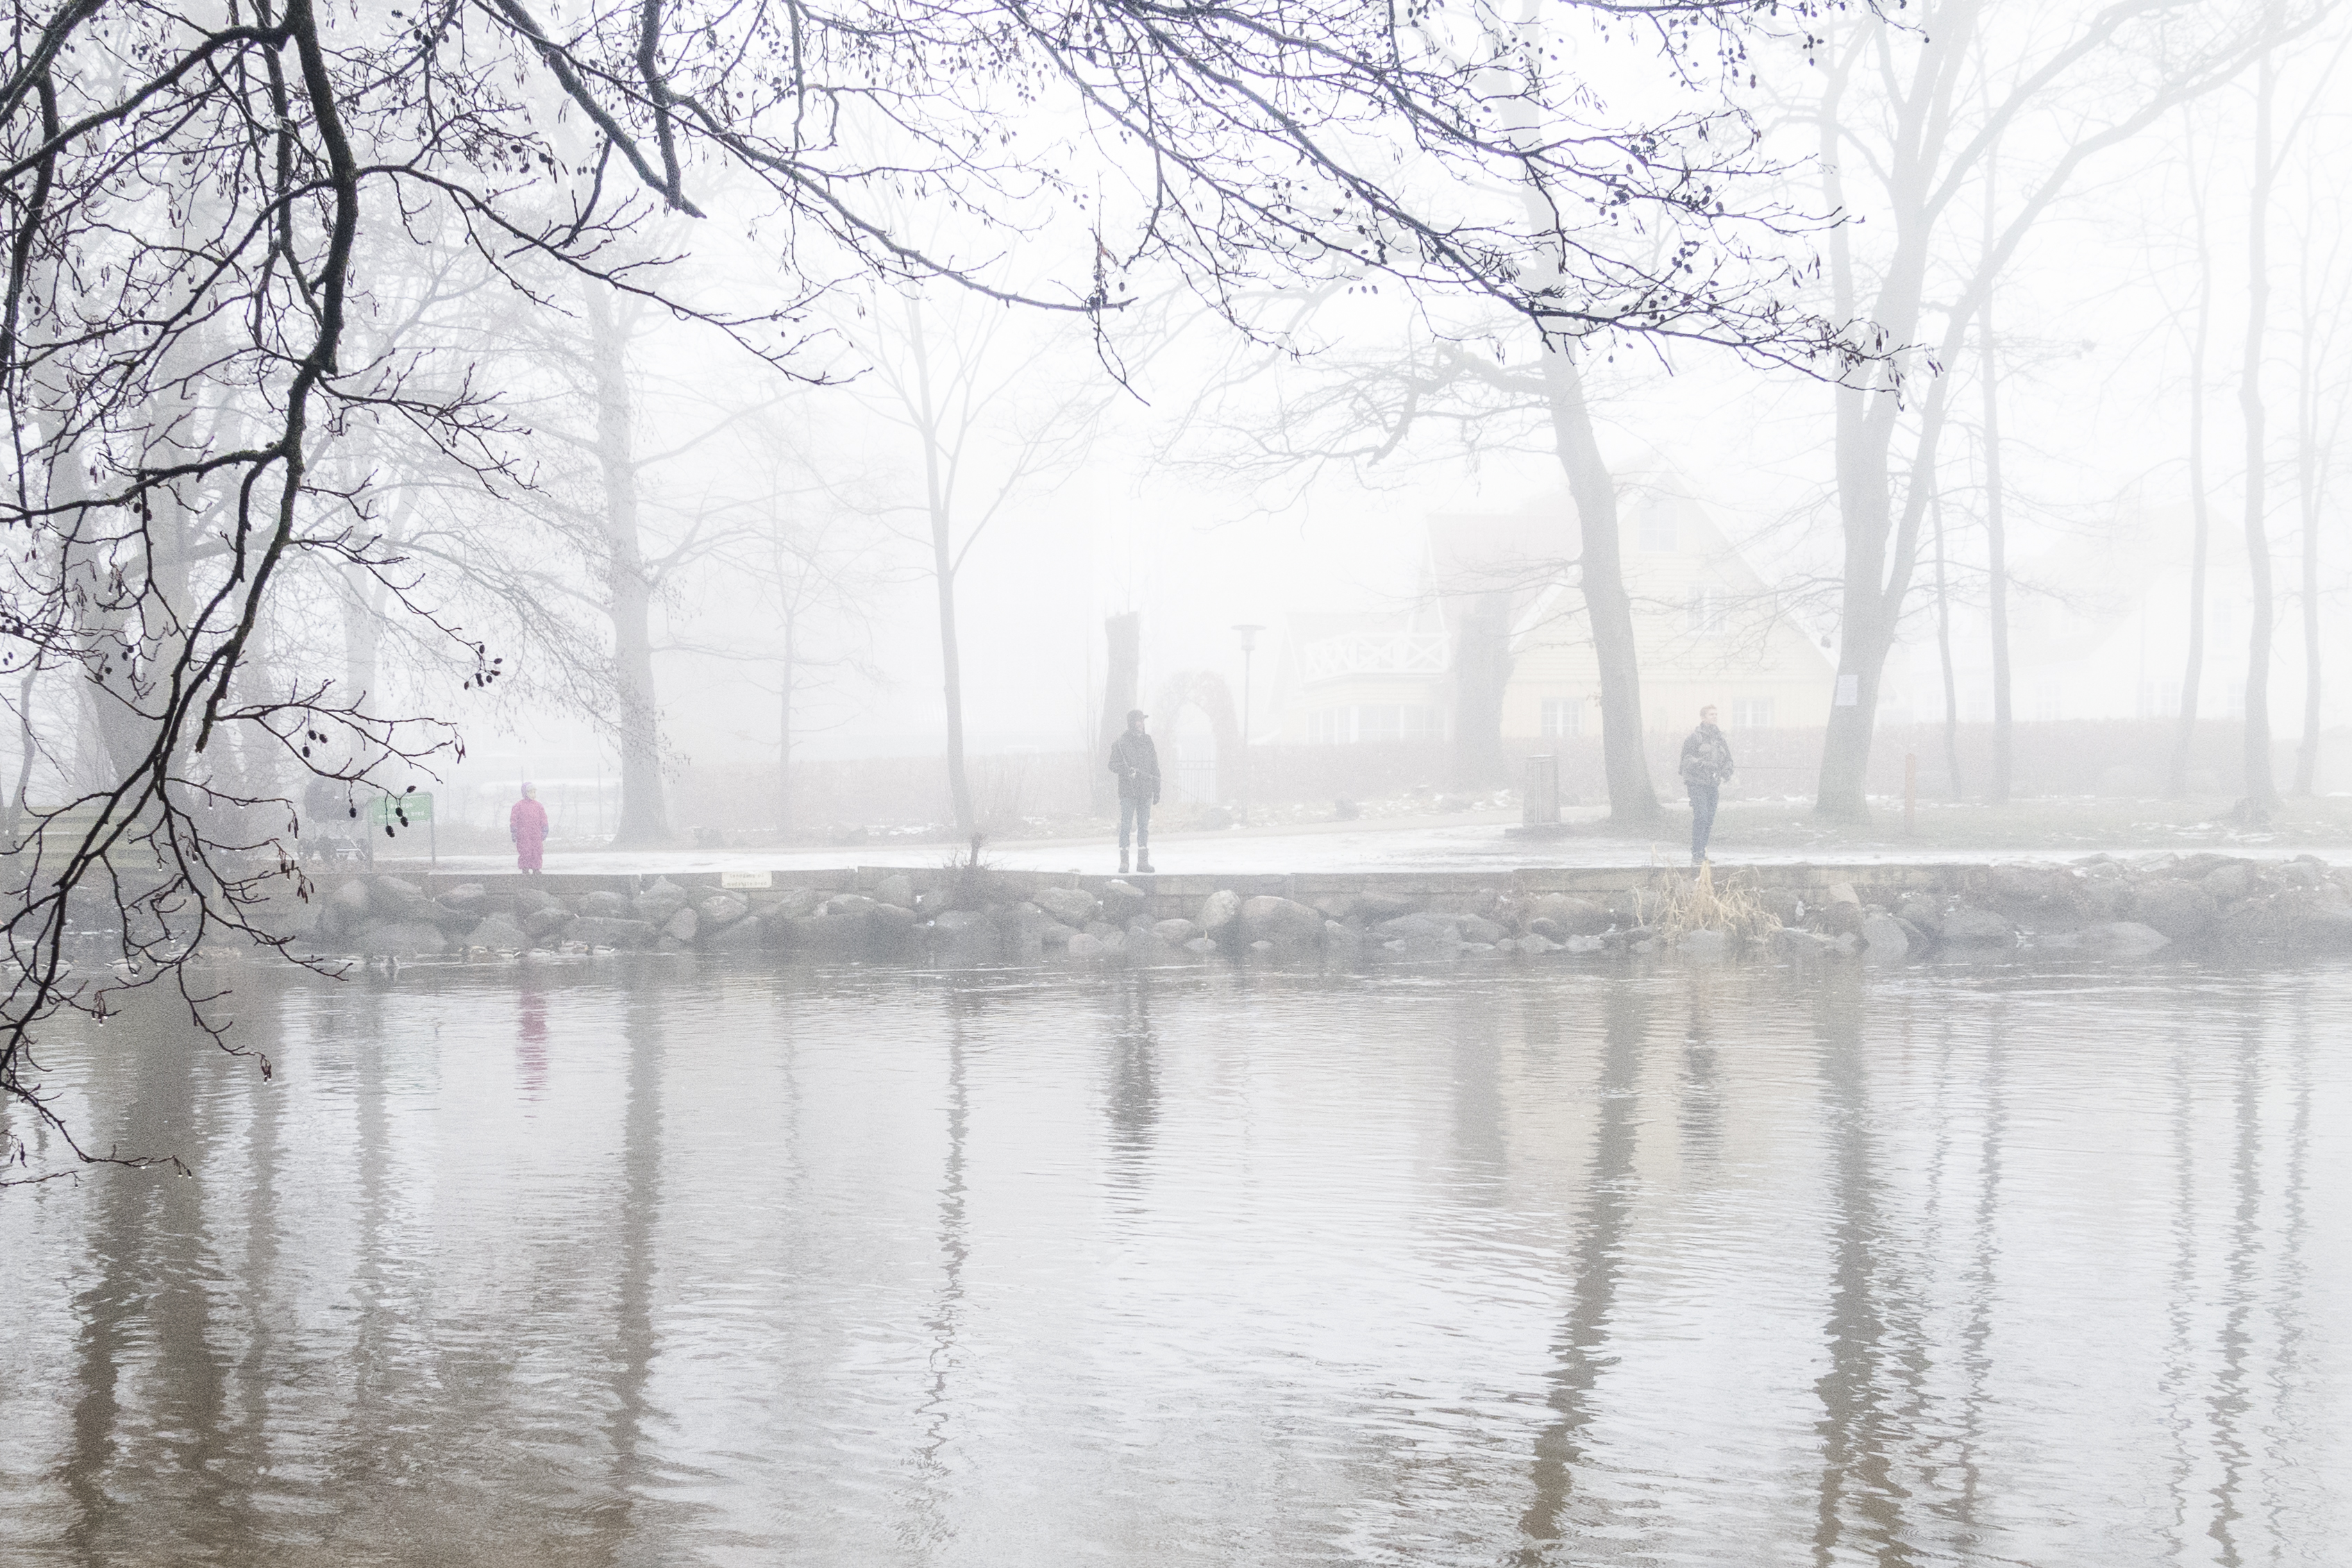 Næstved_city_covered_in_fog_HelenaLundquist_4